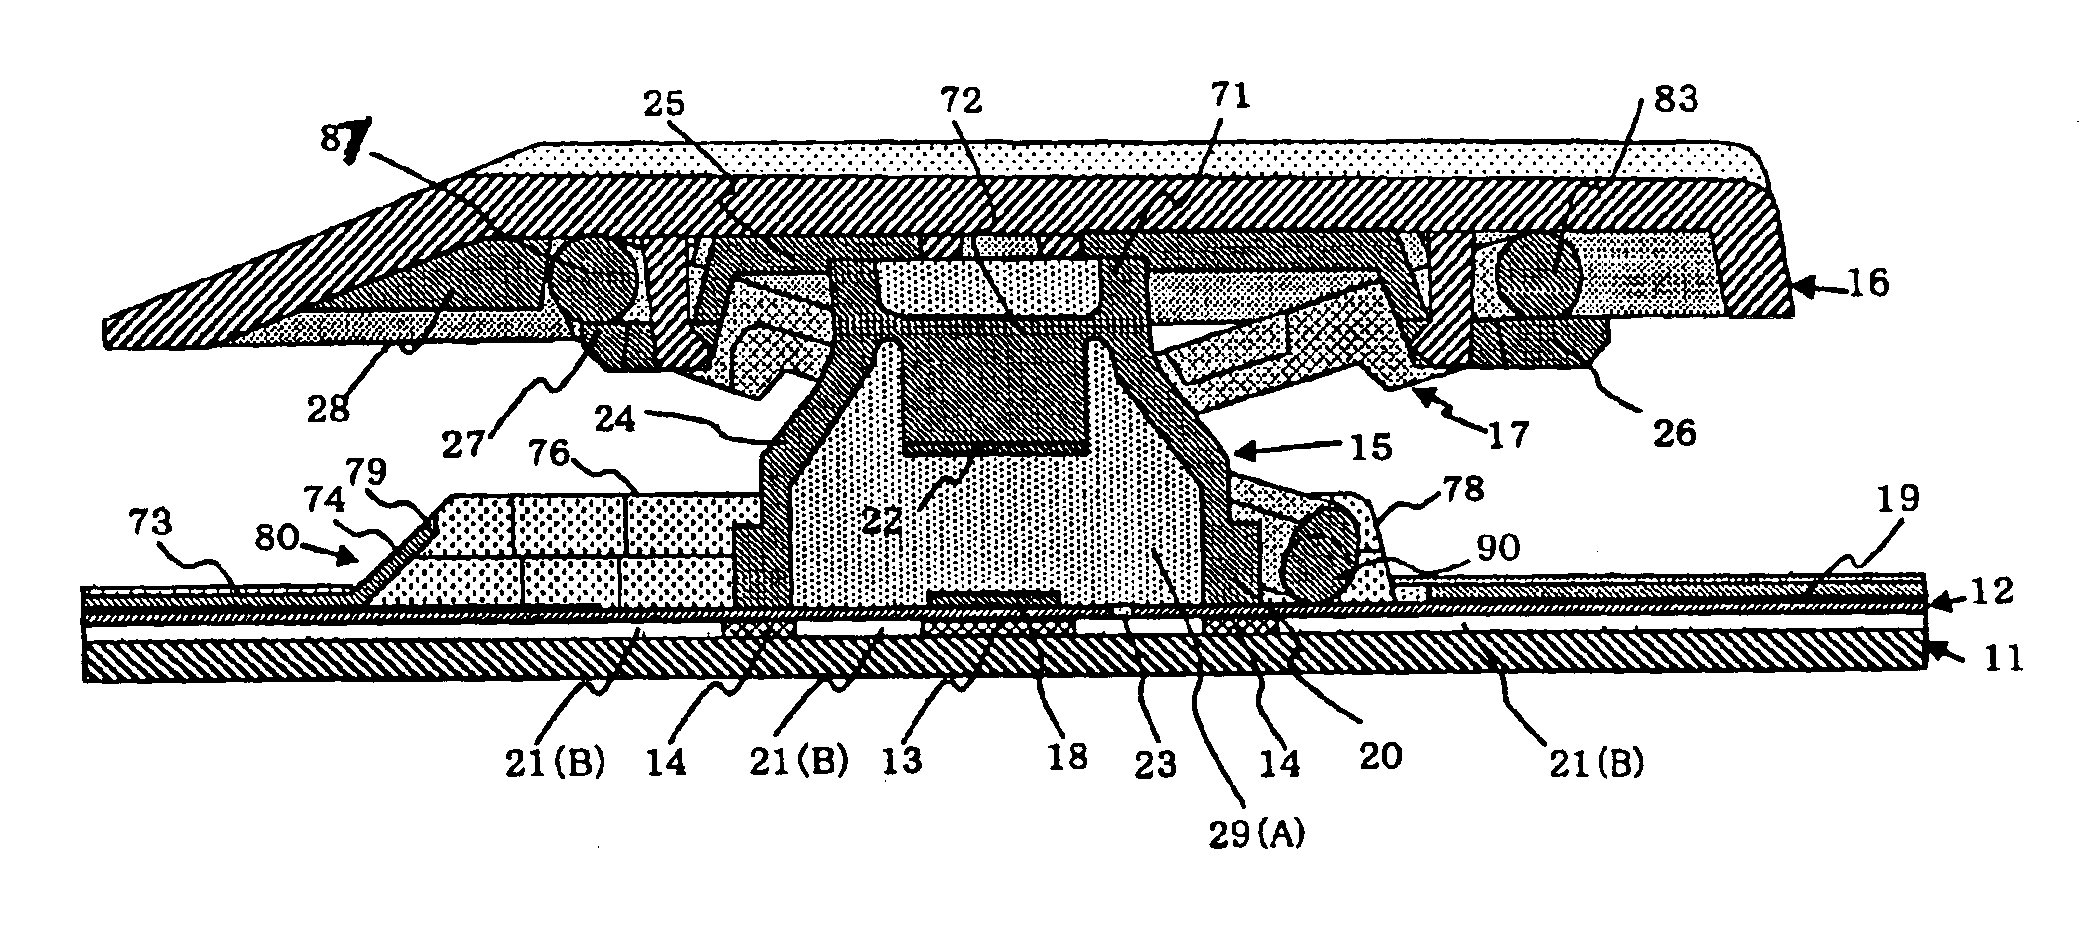 Keyboard switch with internal fluid containment network